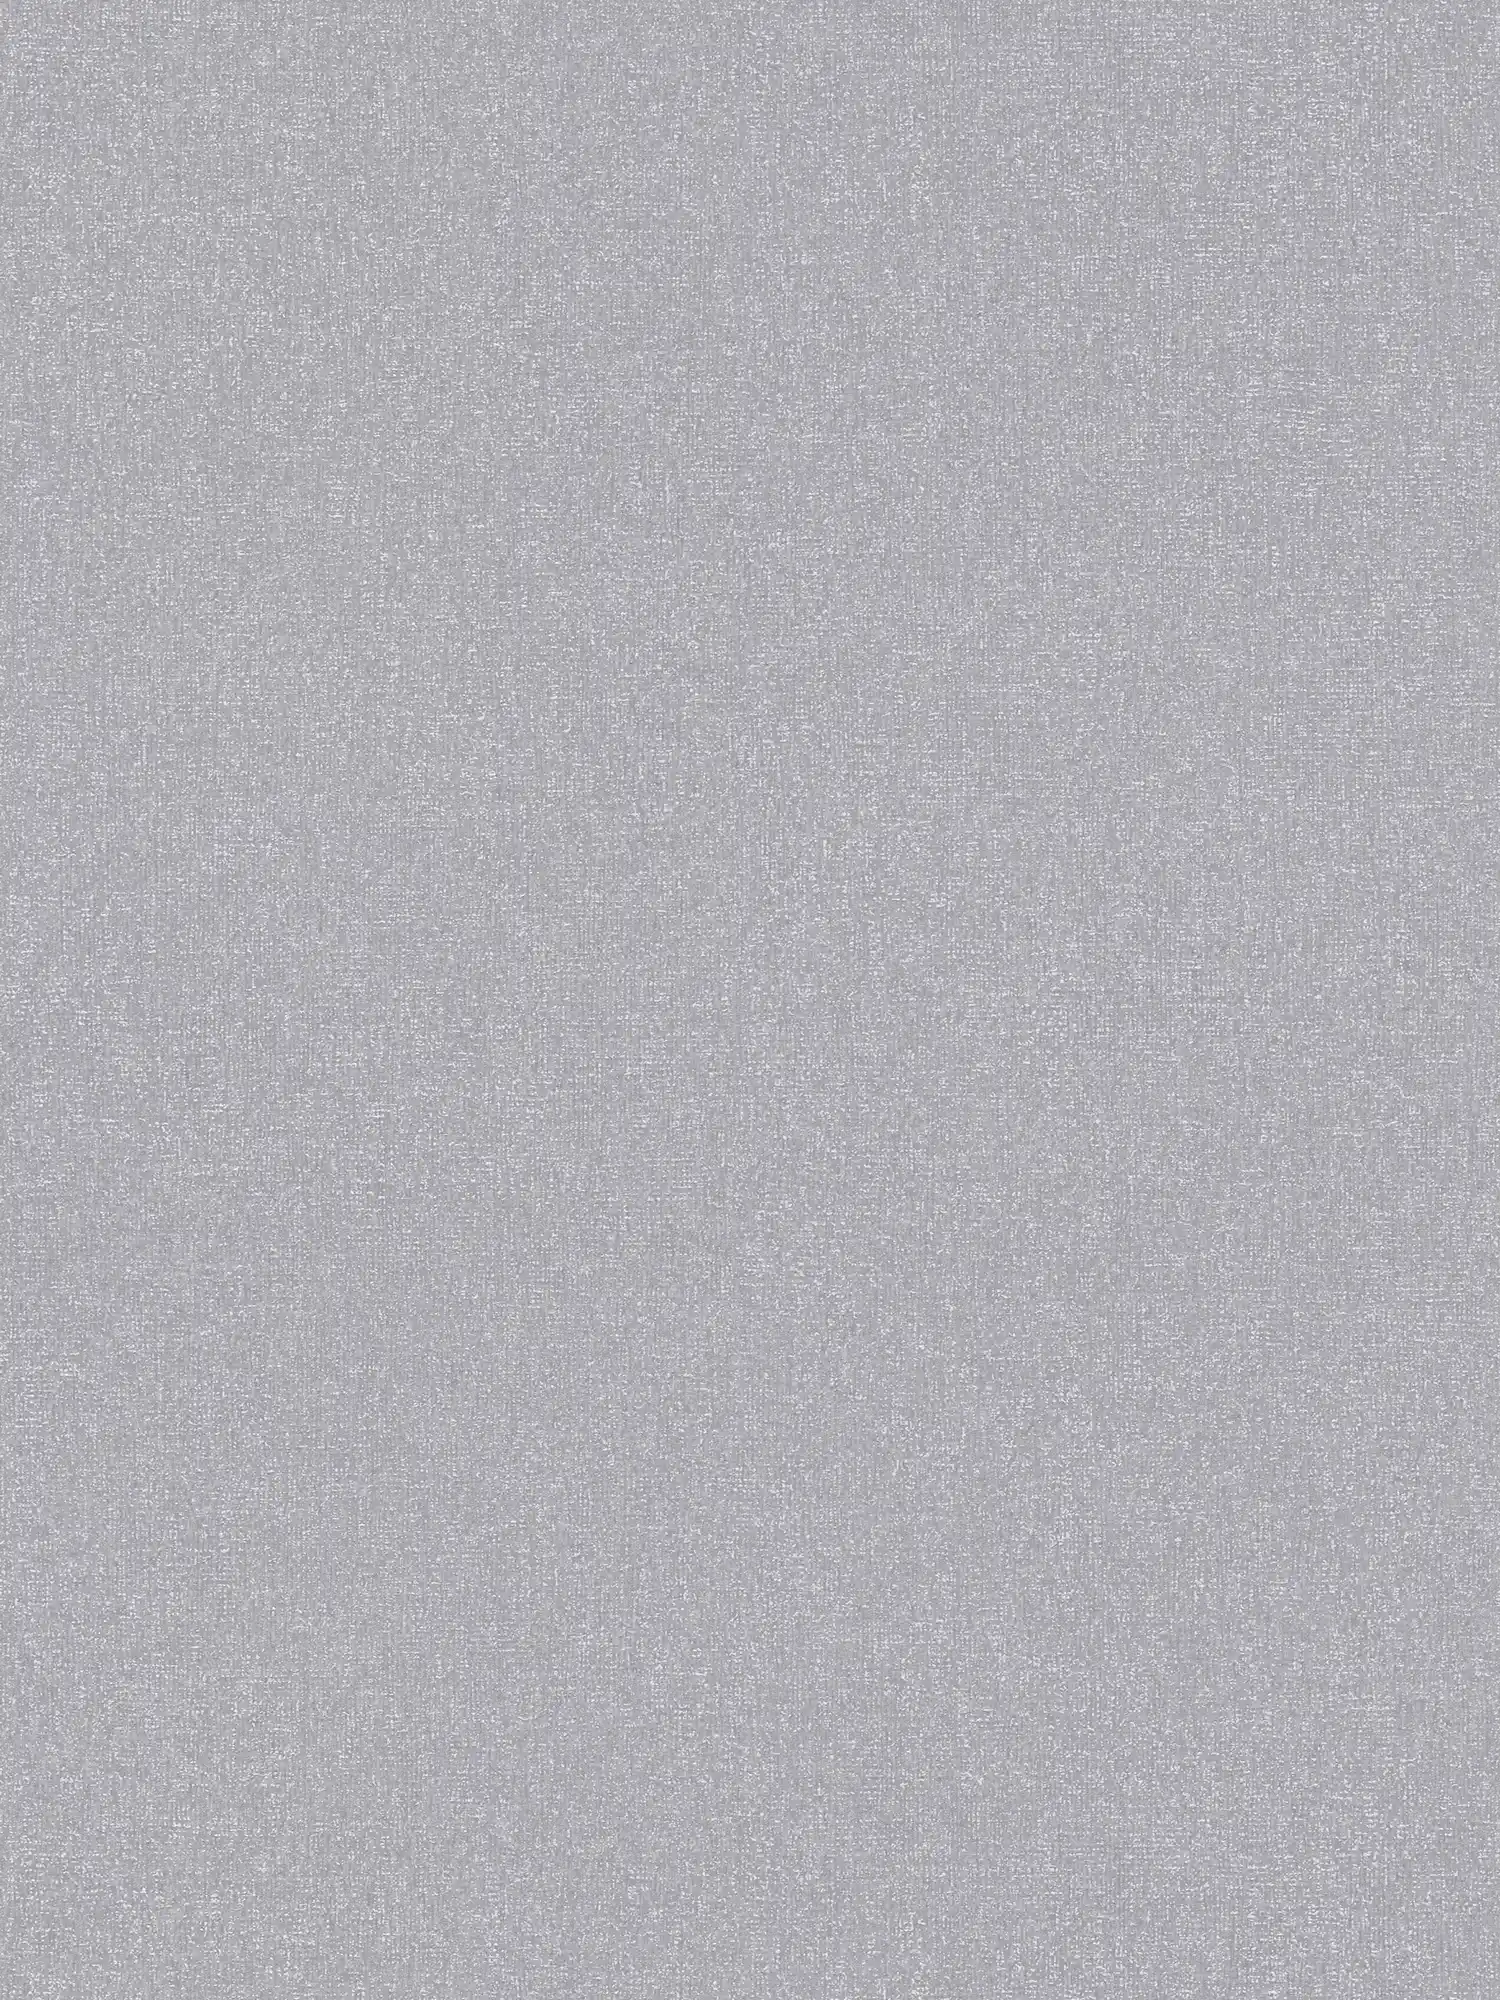 Non-woven wallpaper plains with fine structure - grey
